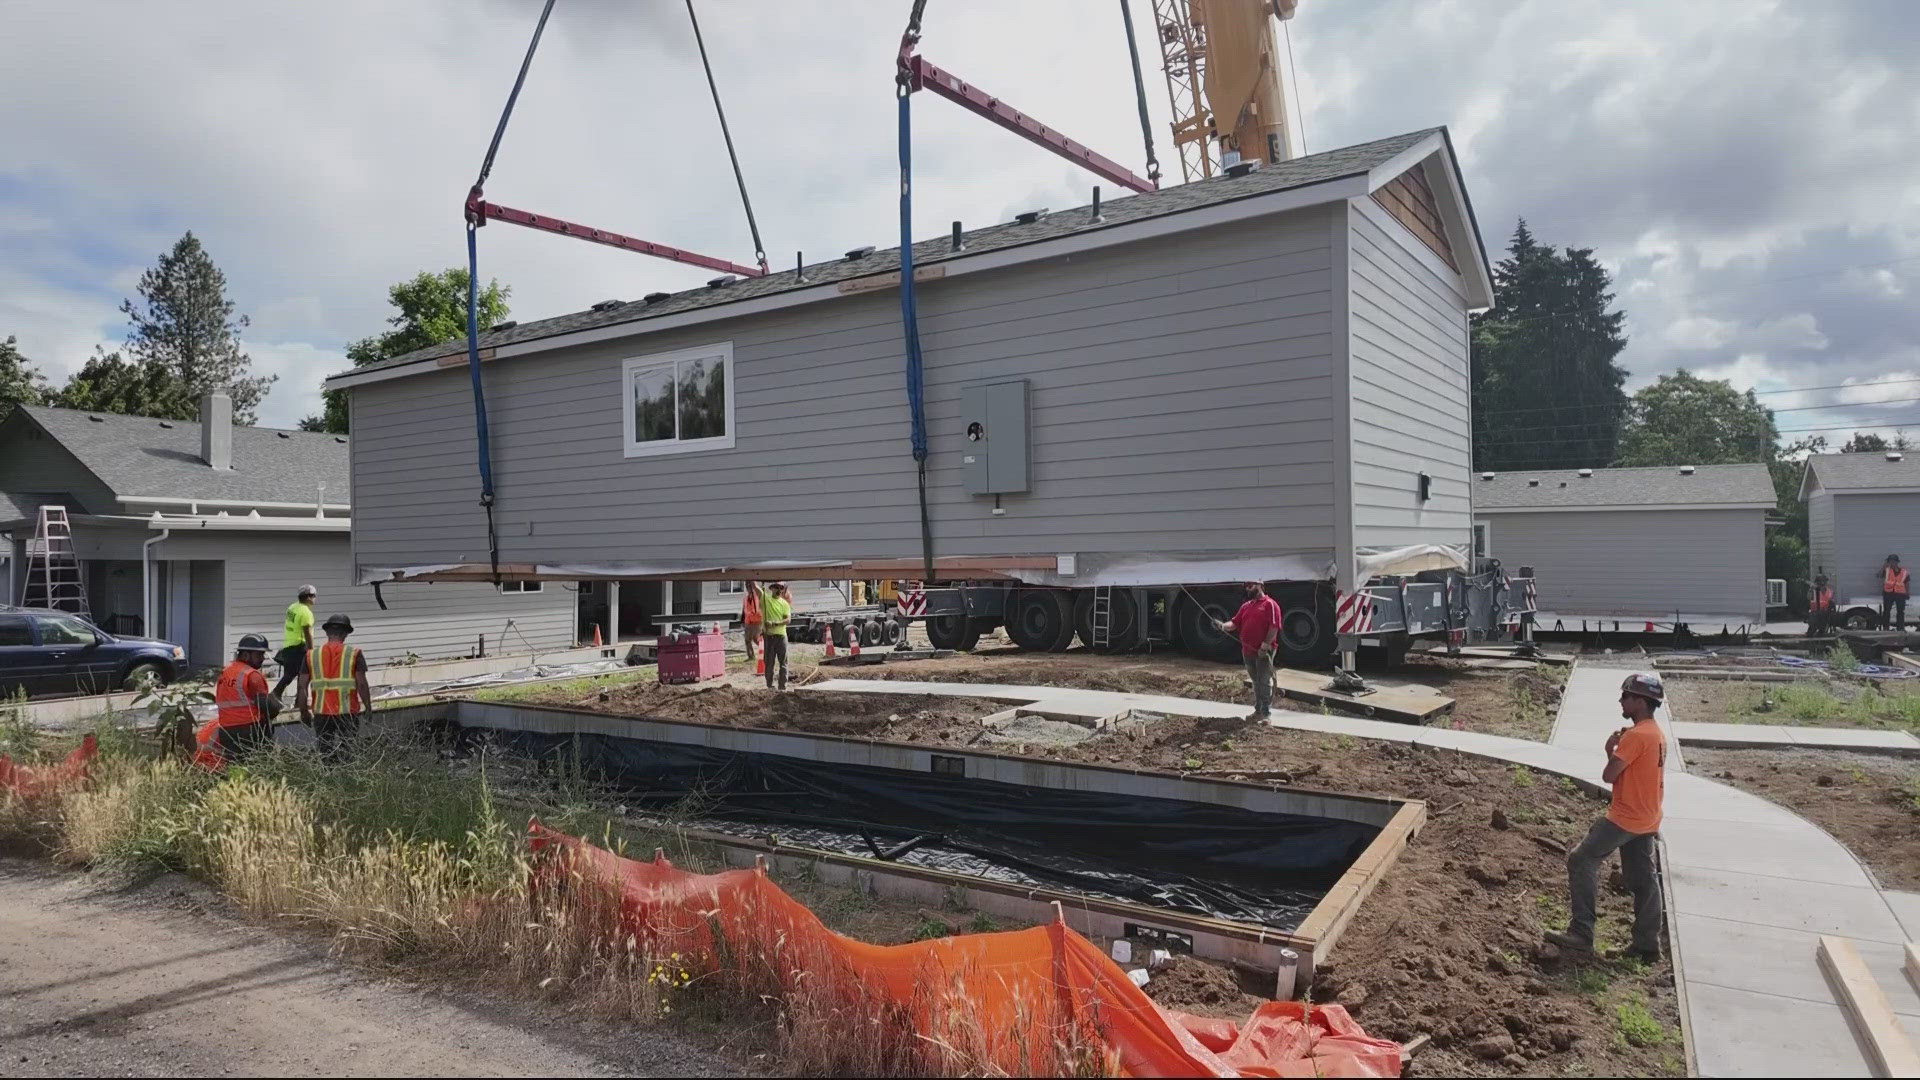 The pre-built tiny homes are part of a community being developed by the nonprofit "Community Roots Collaborative."